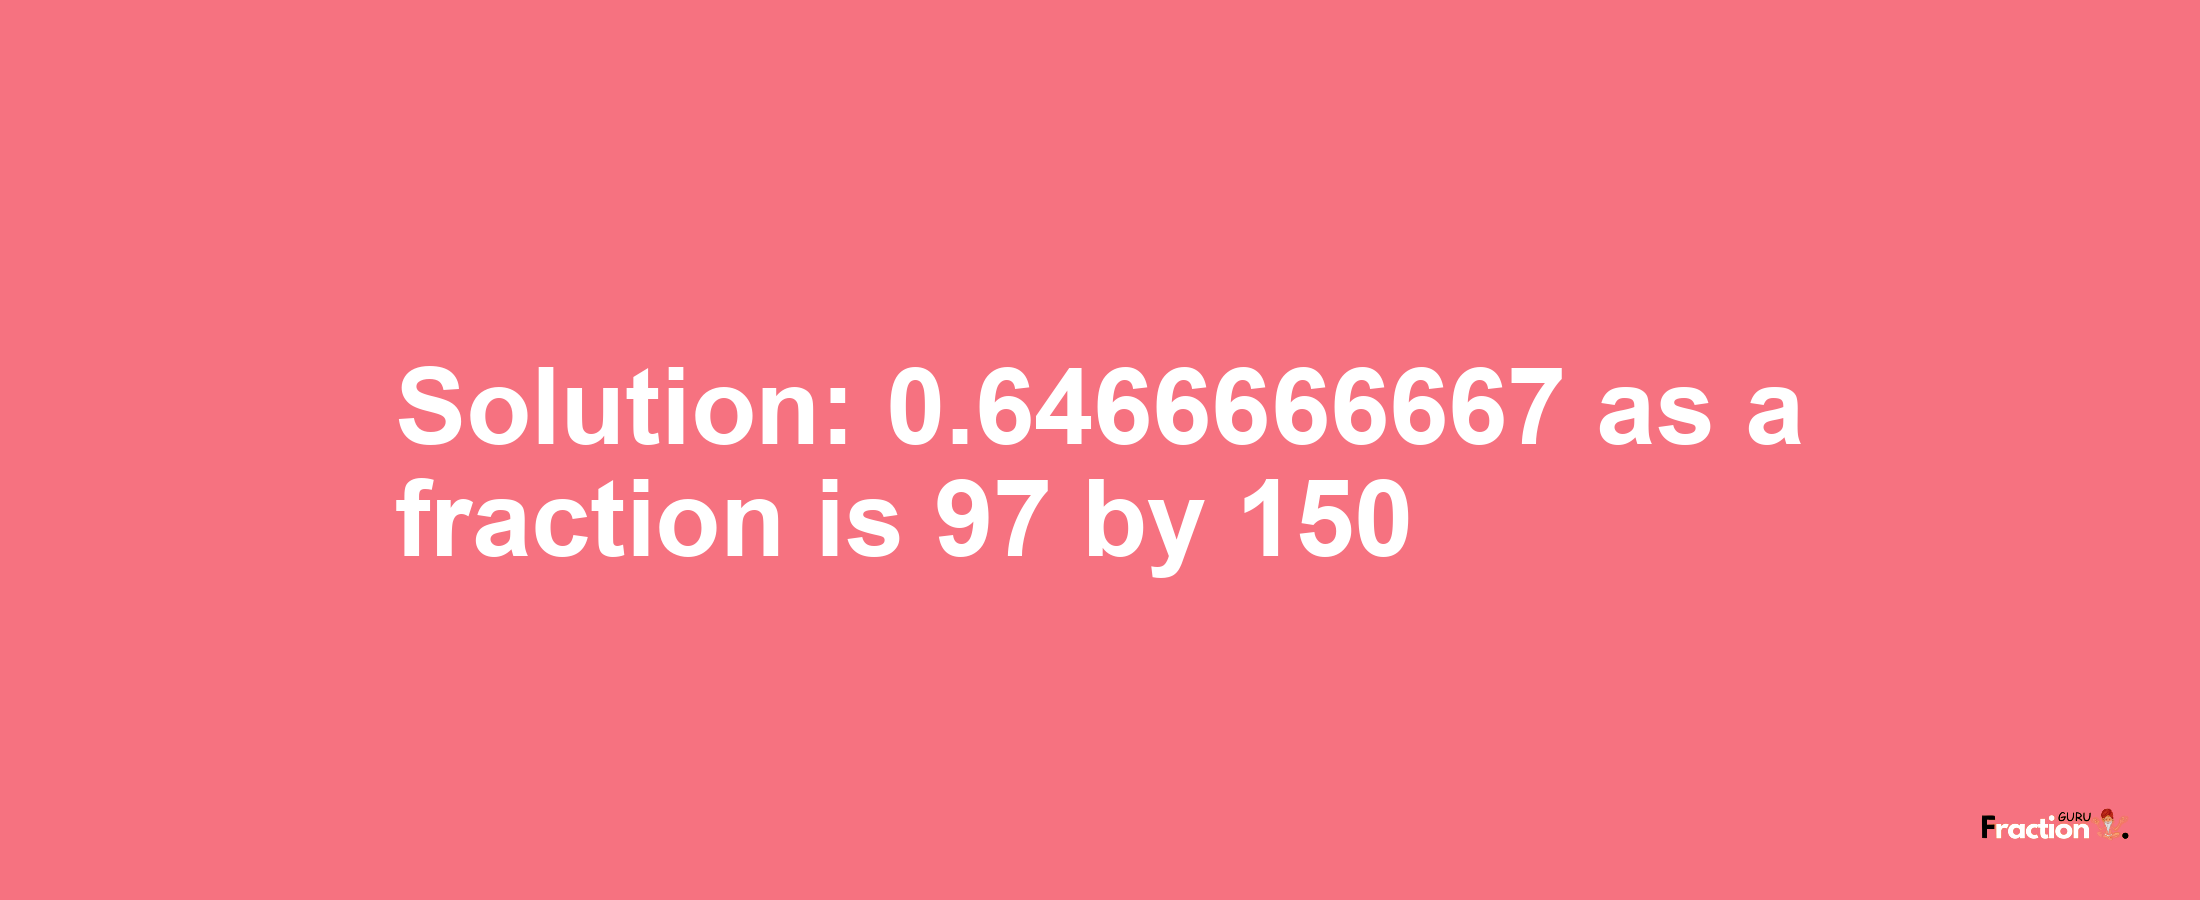 Solution:0.6466666667 as a fraction is 97/150